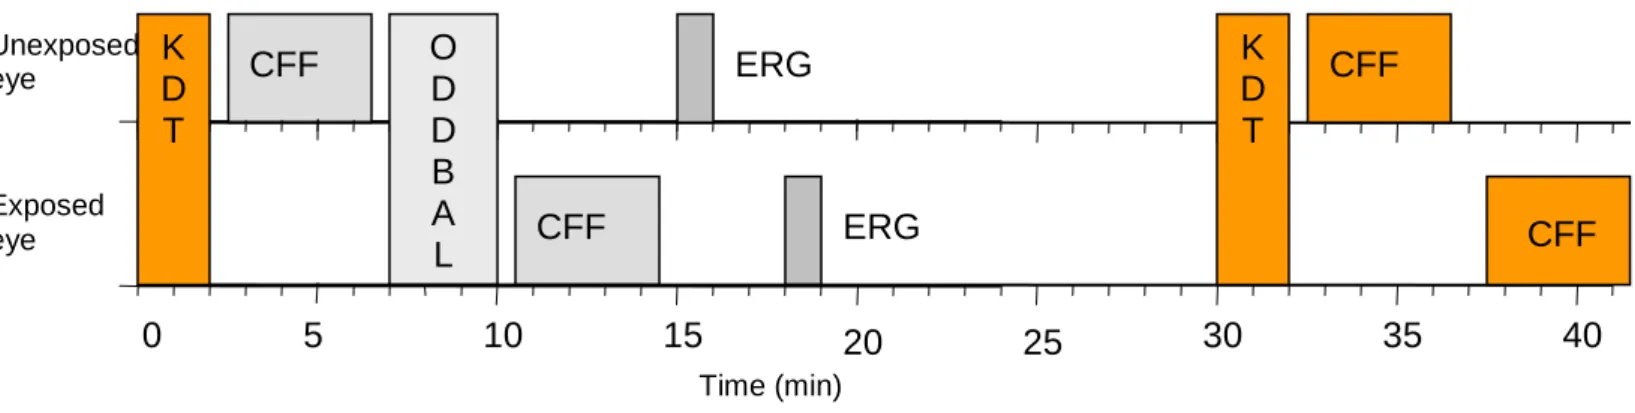 Figure 10: Diagrammatic representation of each test session in the modified protocol. Time (minutes) is shown  on the horizontal axis